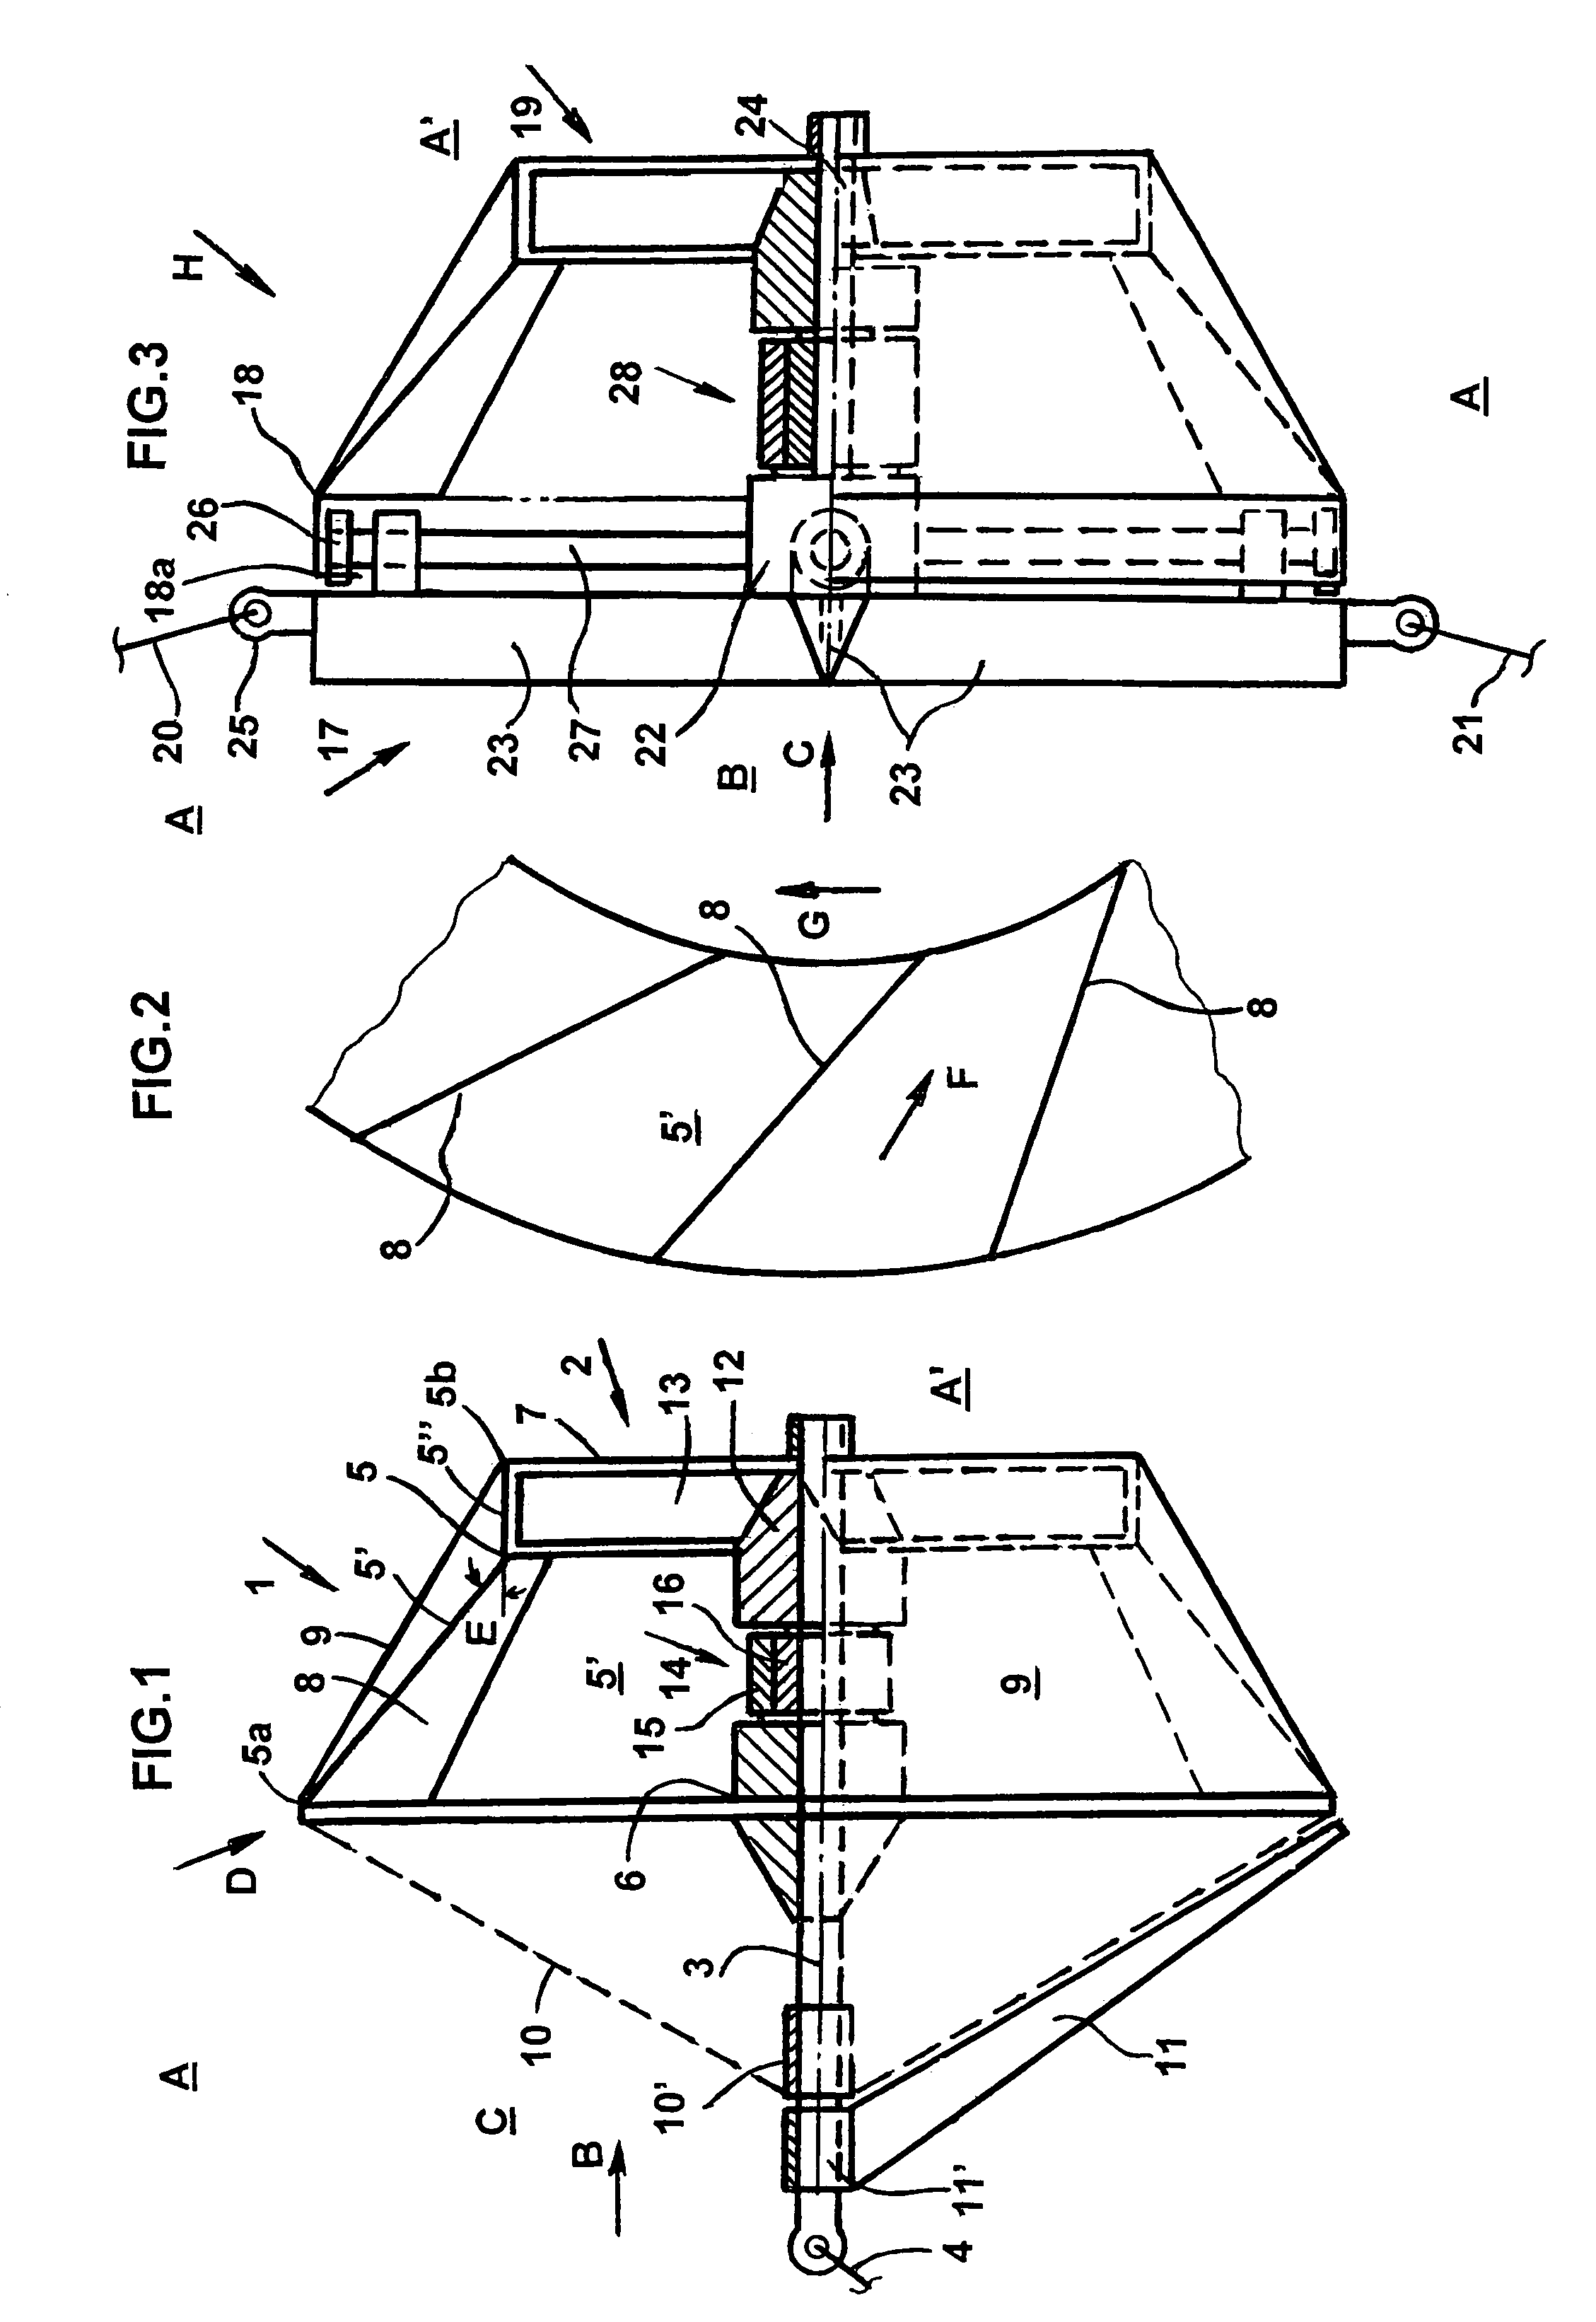 Apparatus for receiving and transferring kinetic energy from a flow and wave